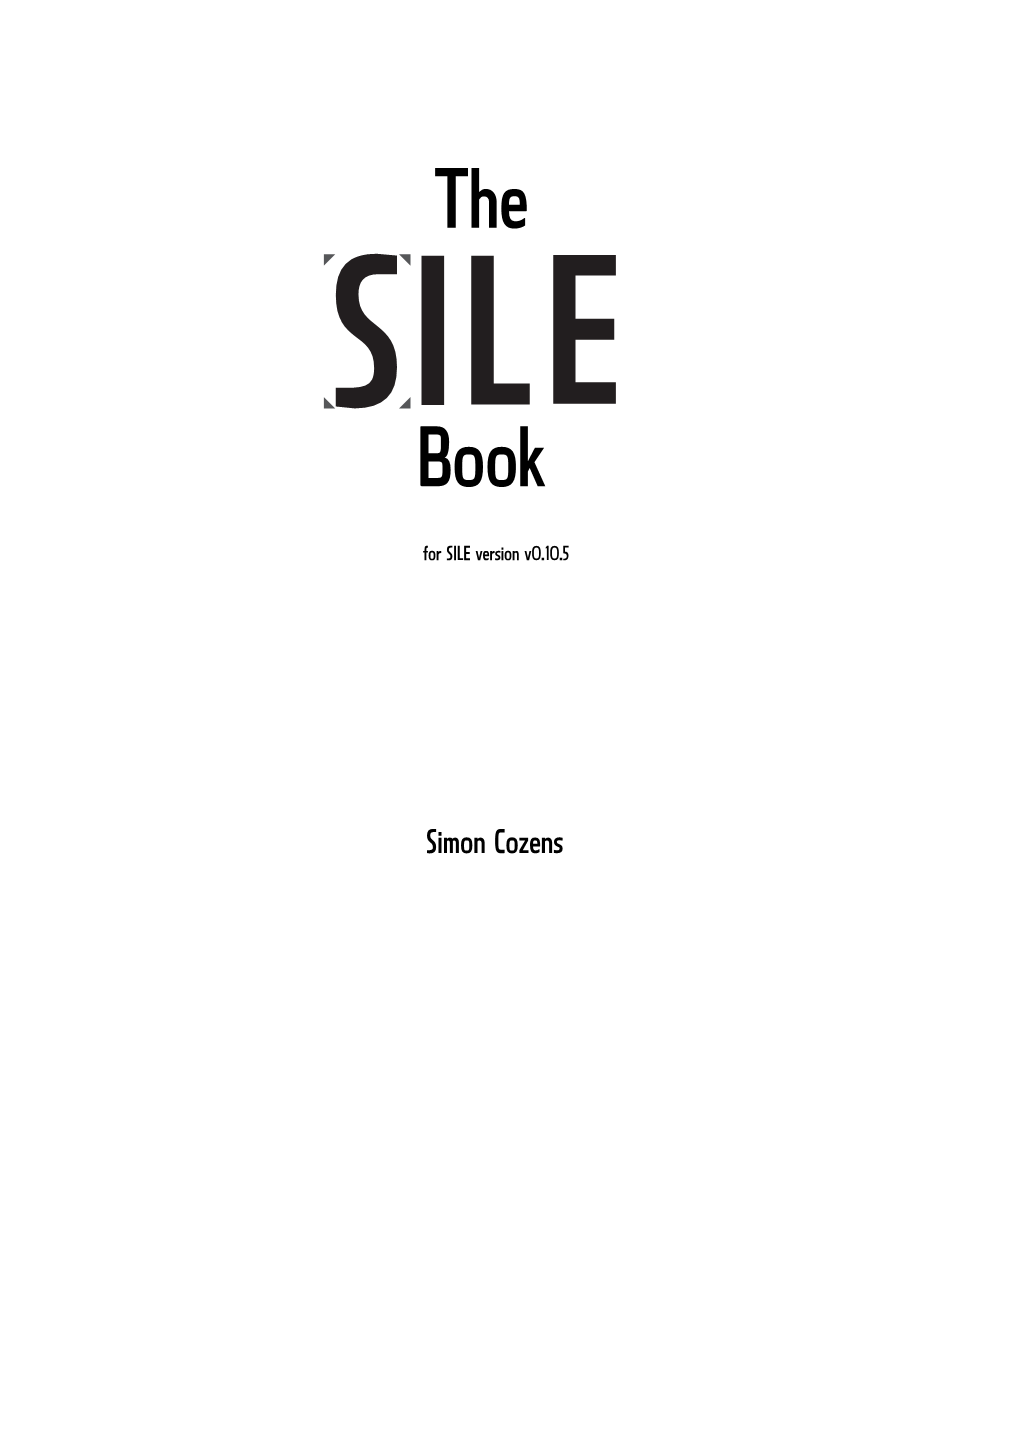 The SILE Book Class